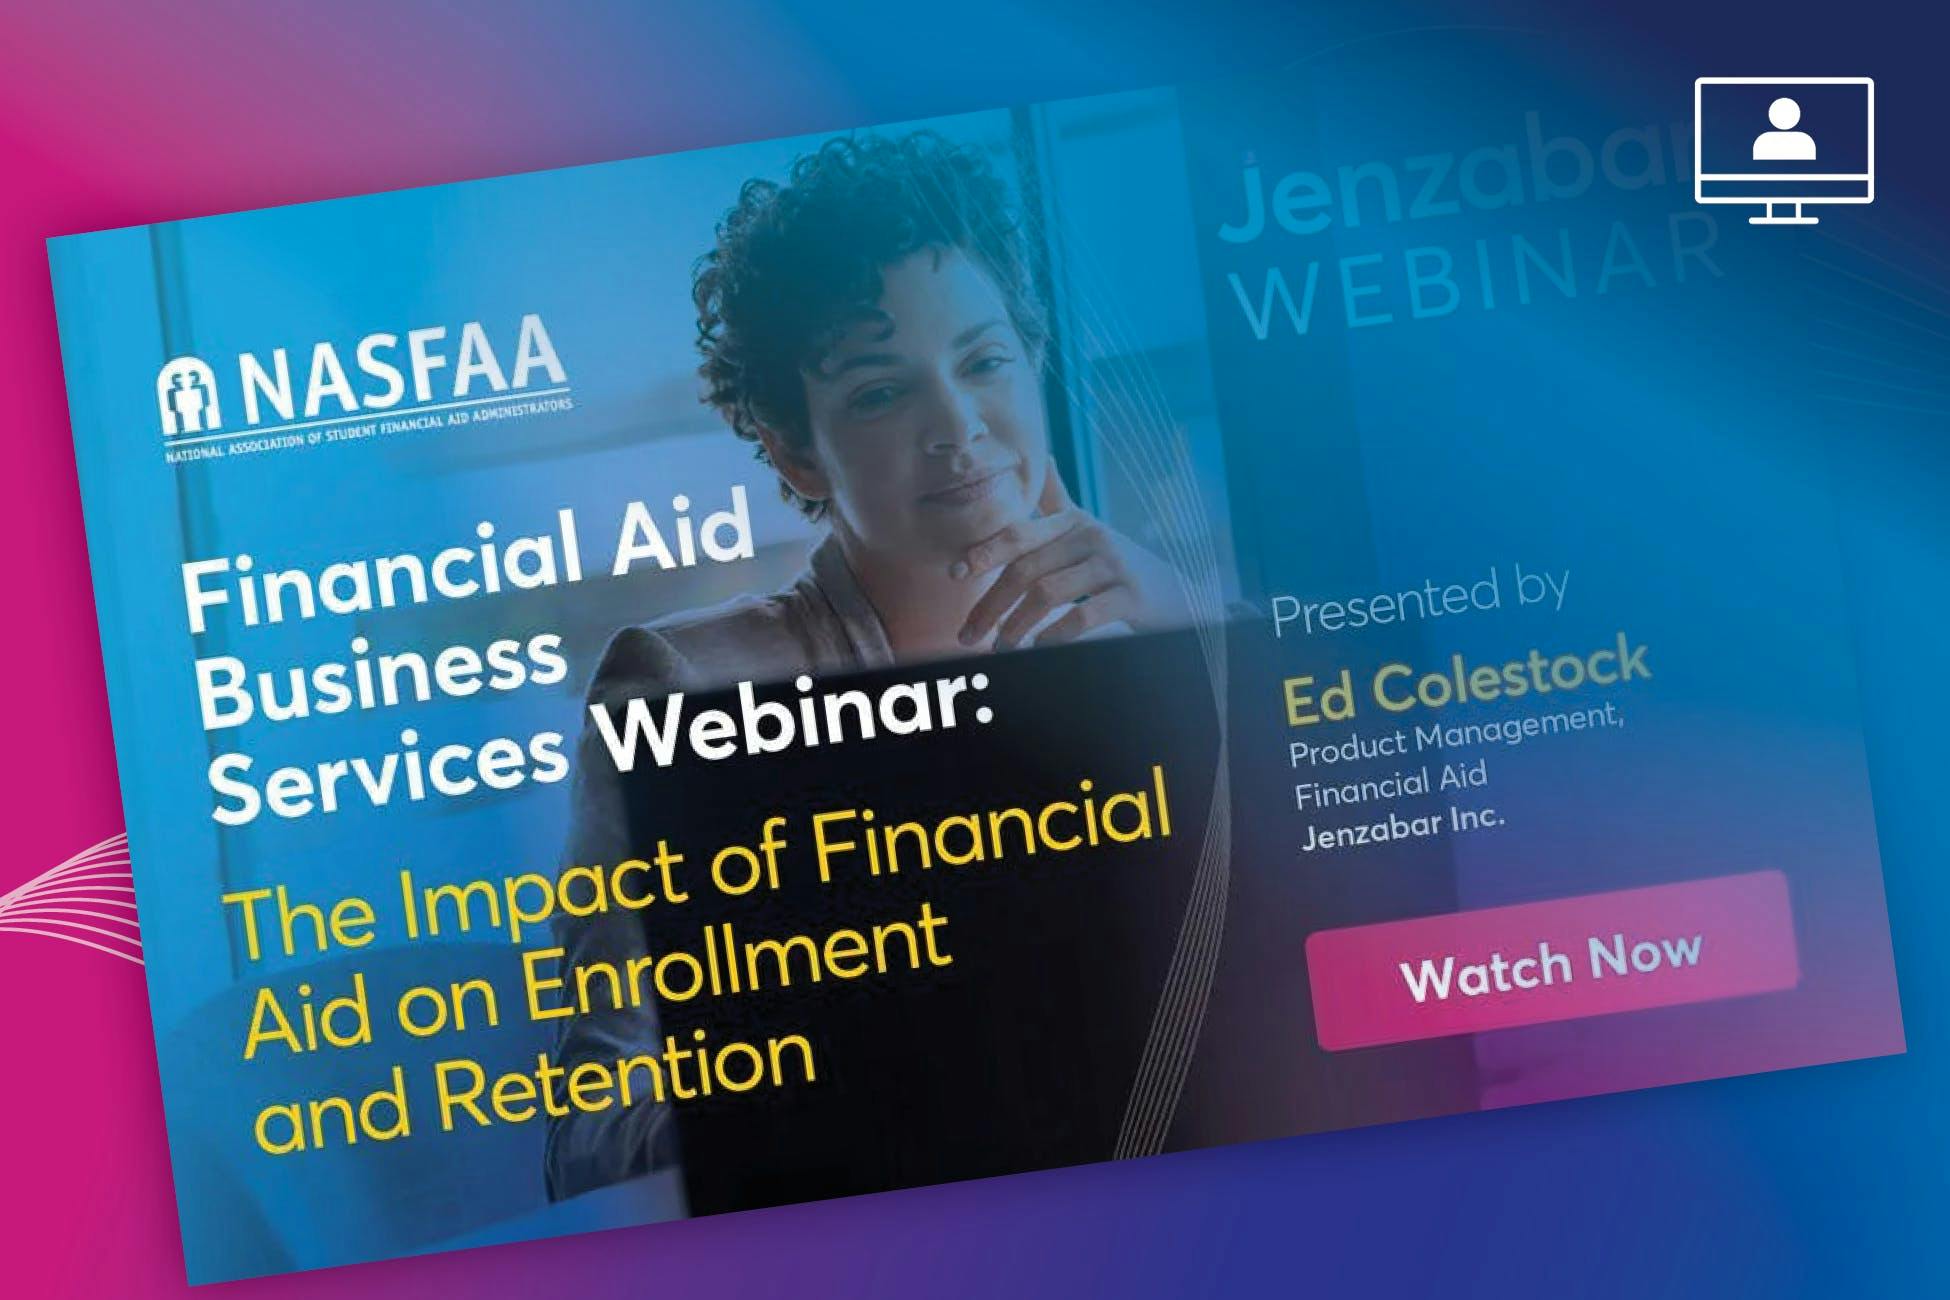 Webinar: The Impact of Financial Aid on Enrollment and Retention